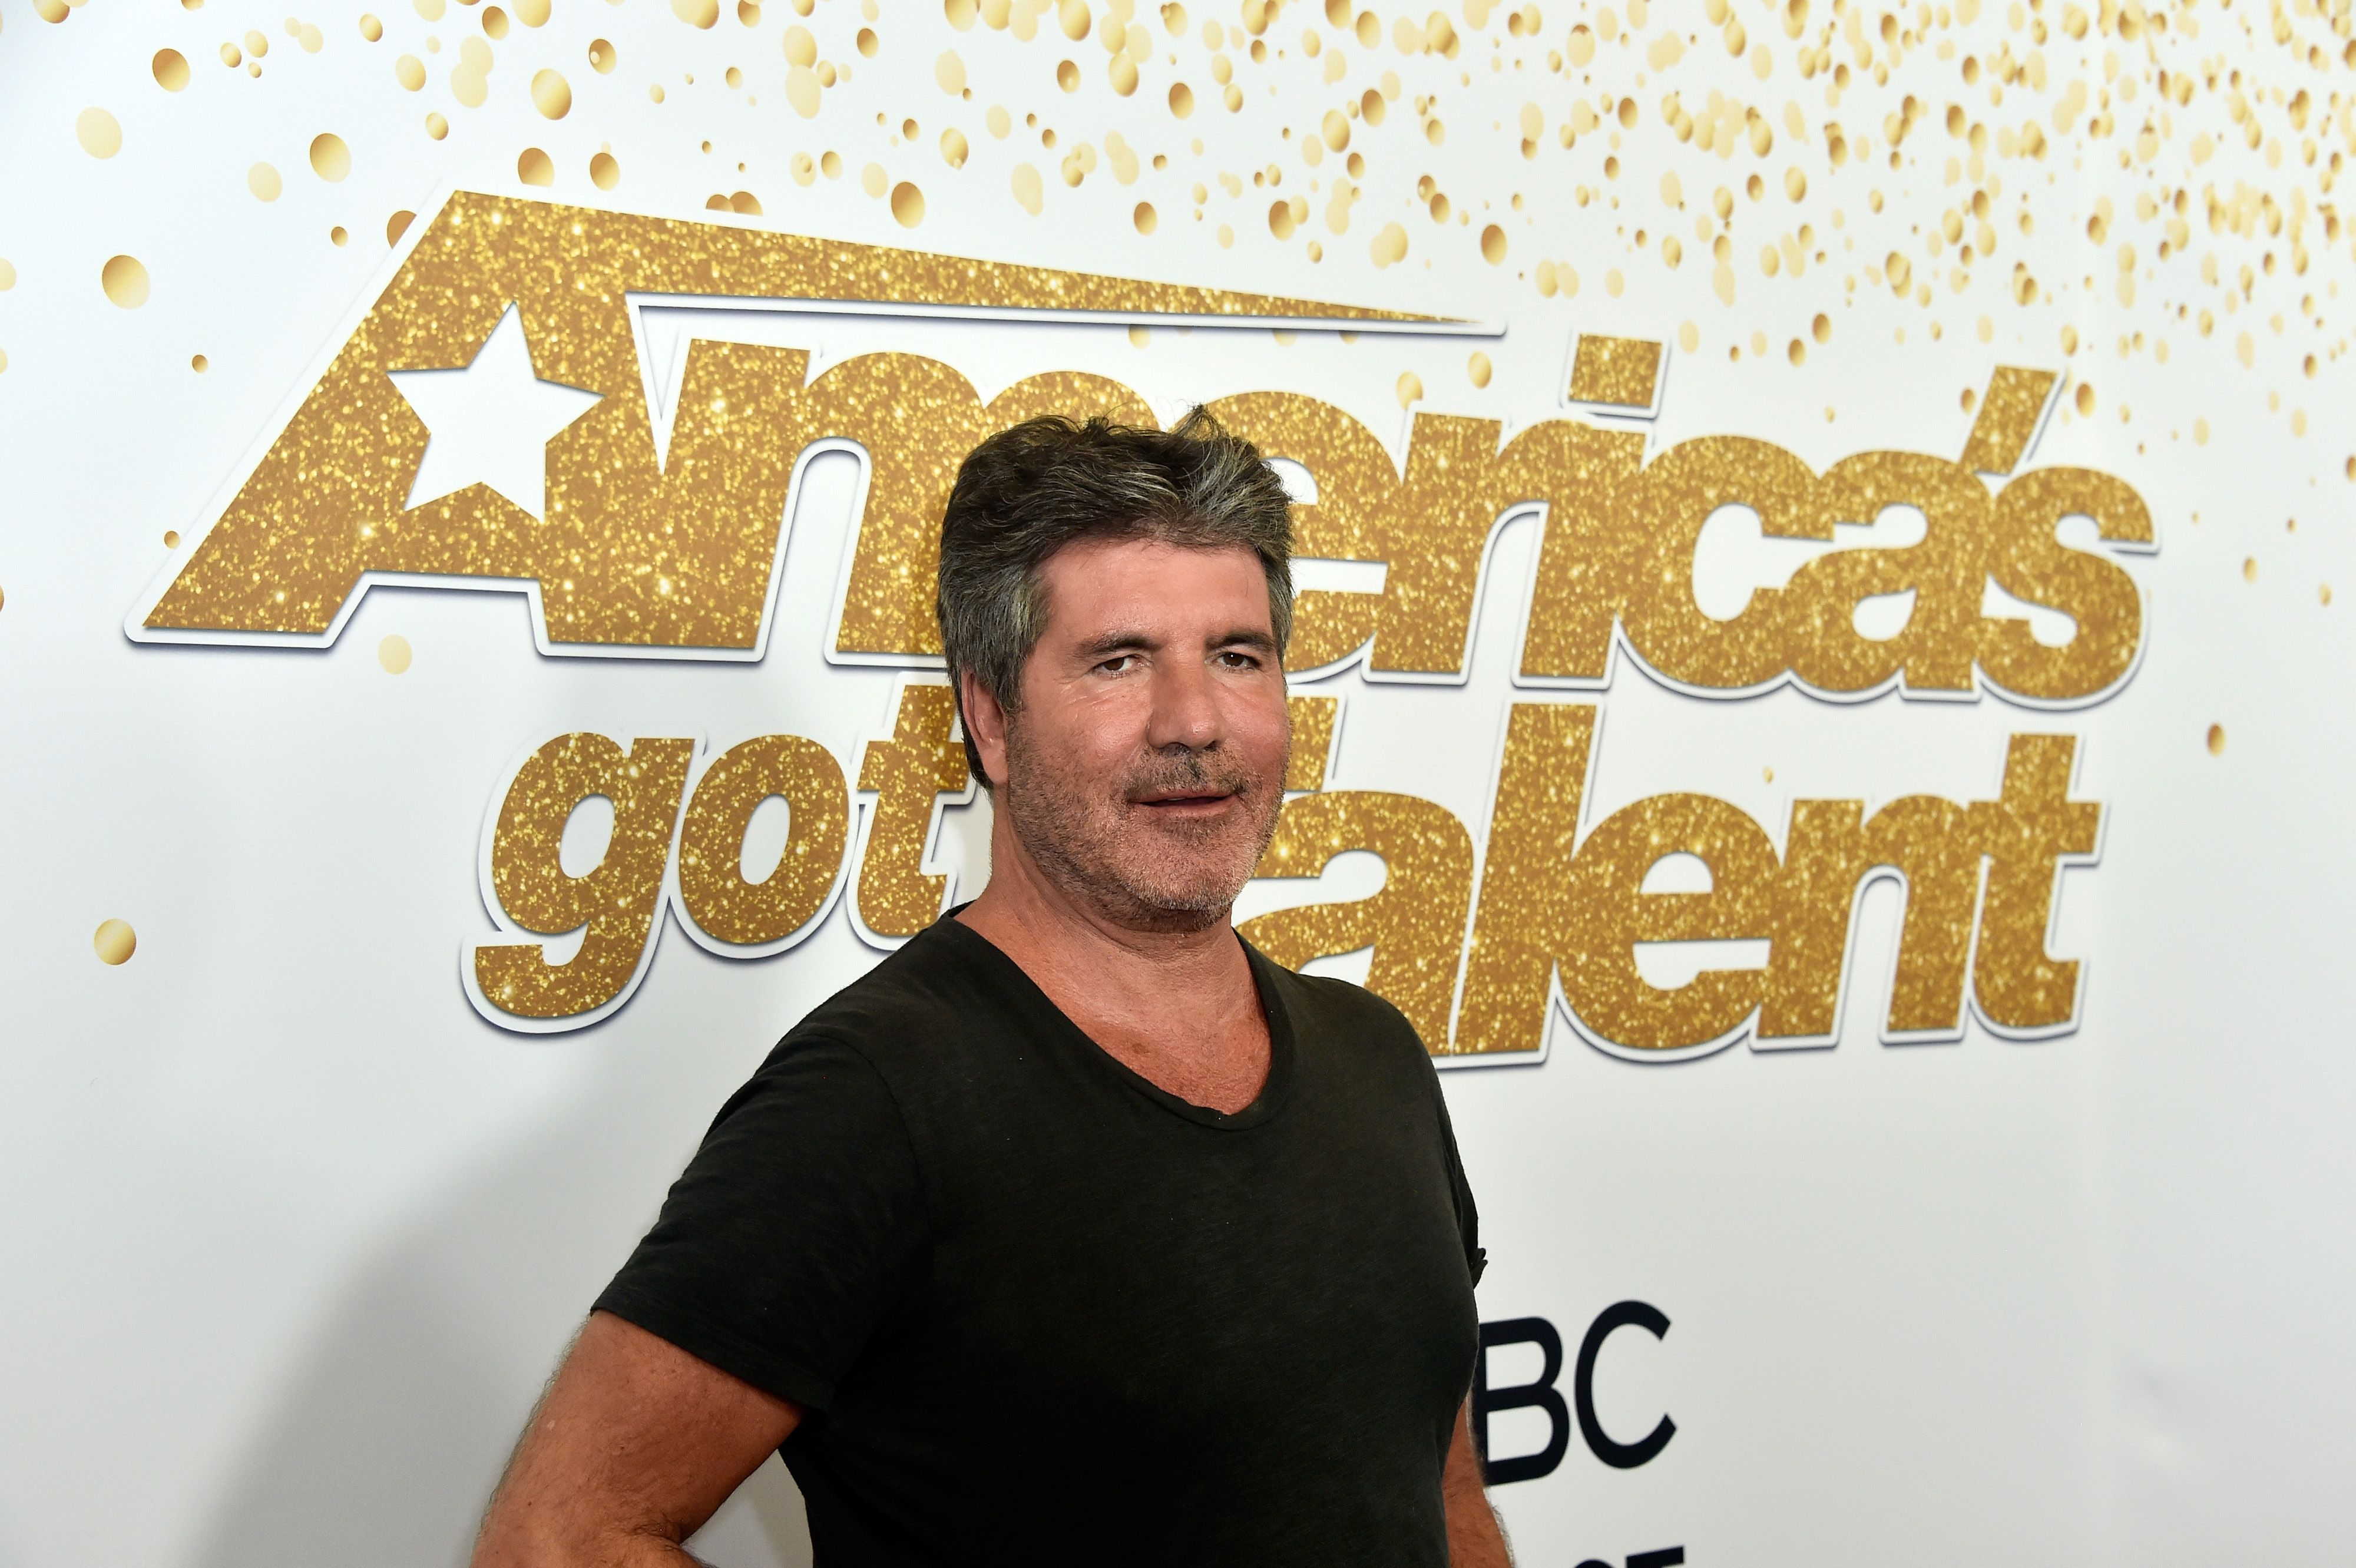 11 Women That Agt Judge Simon Cowell Has Dated Glimpse Inside His Relationship History